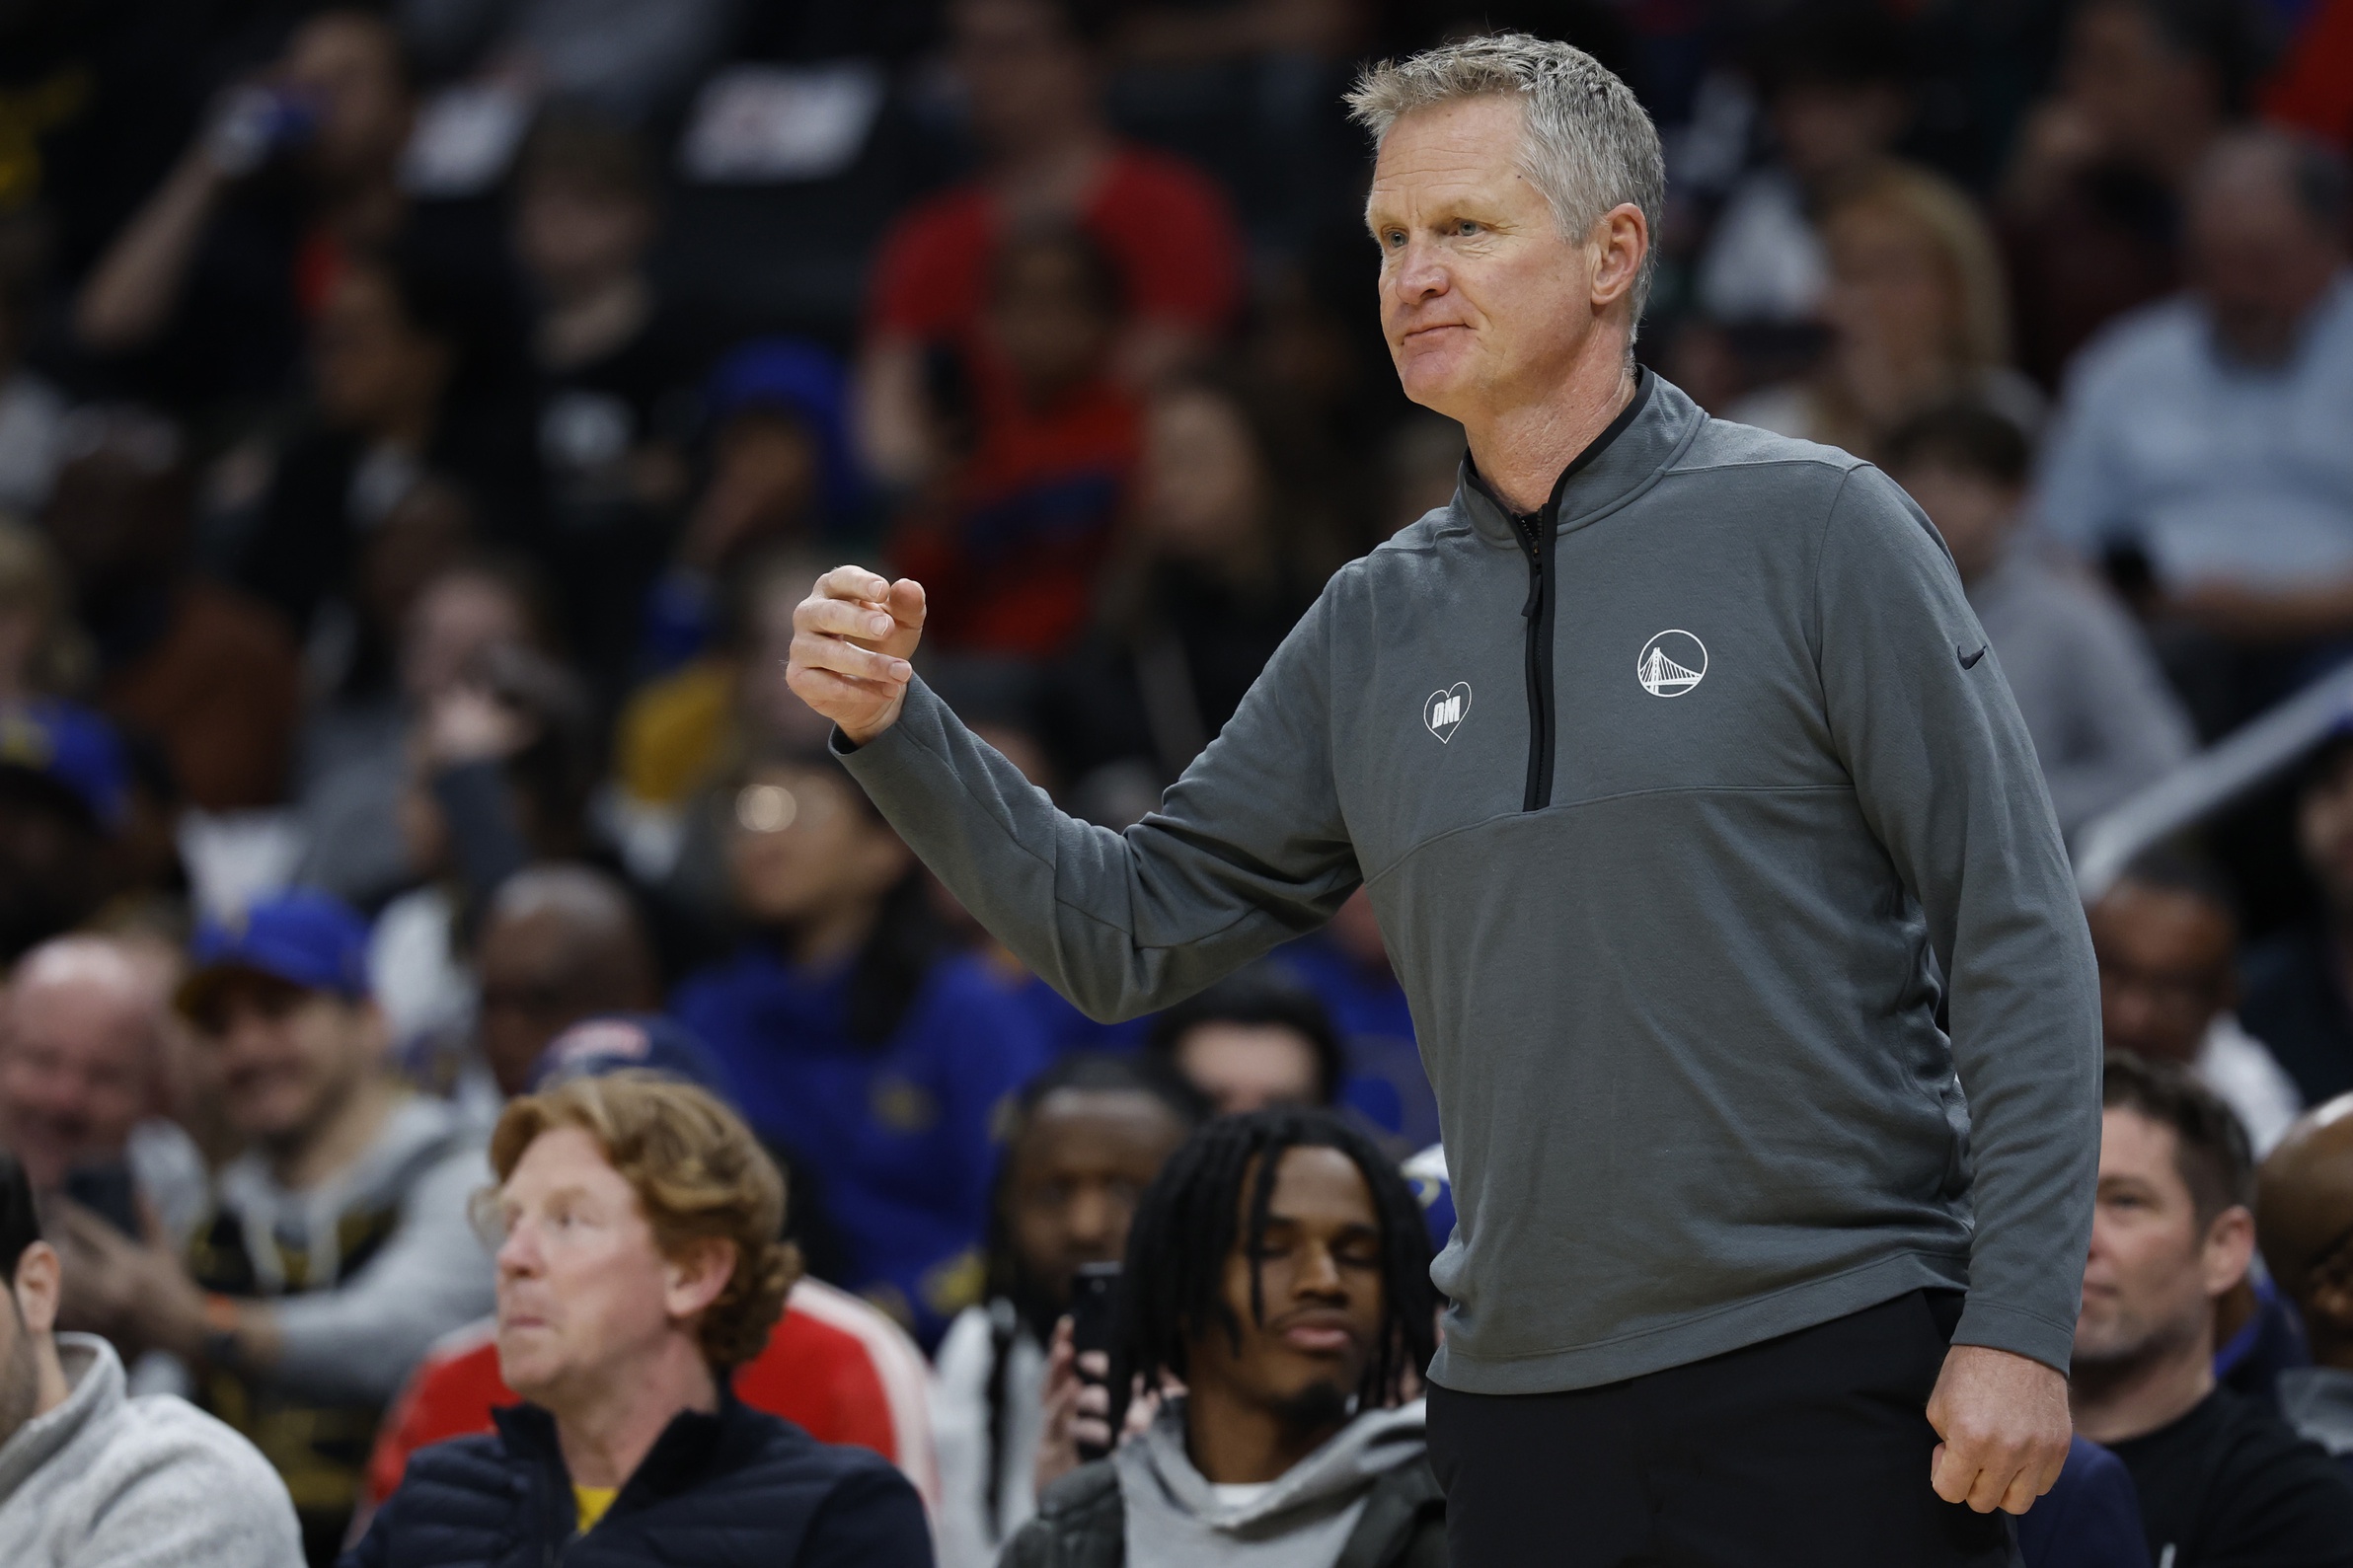 The Warriors playoff run has been spurred by lineup changes from Steve Kerr